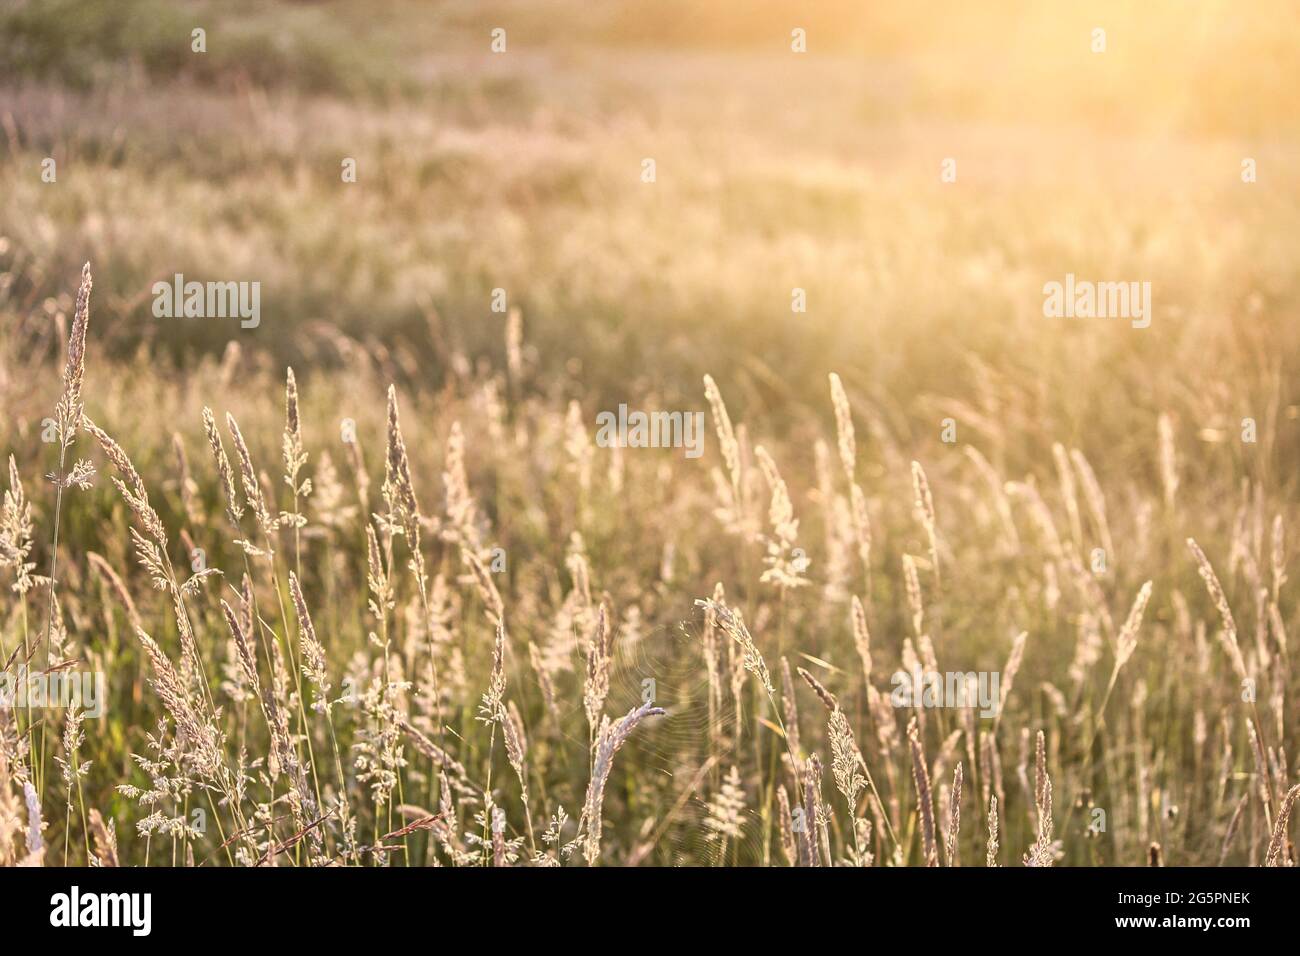 Field of tall fescue grass at golden hour Stock Photo